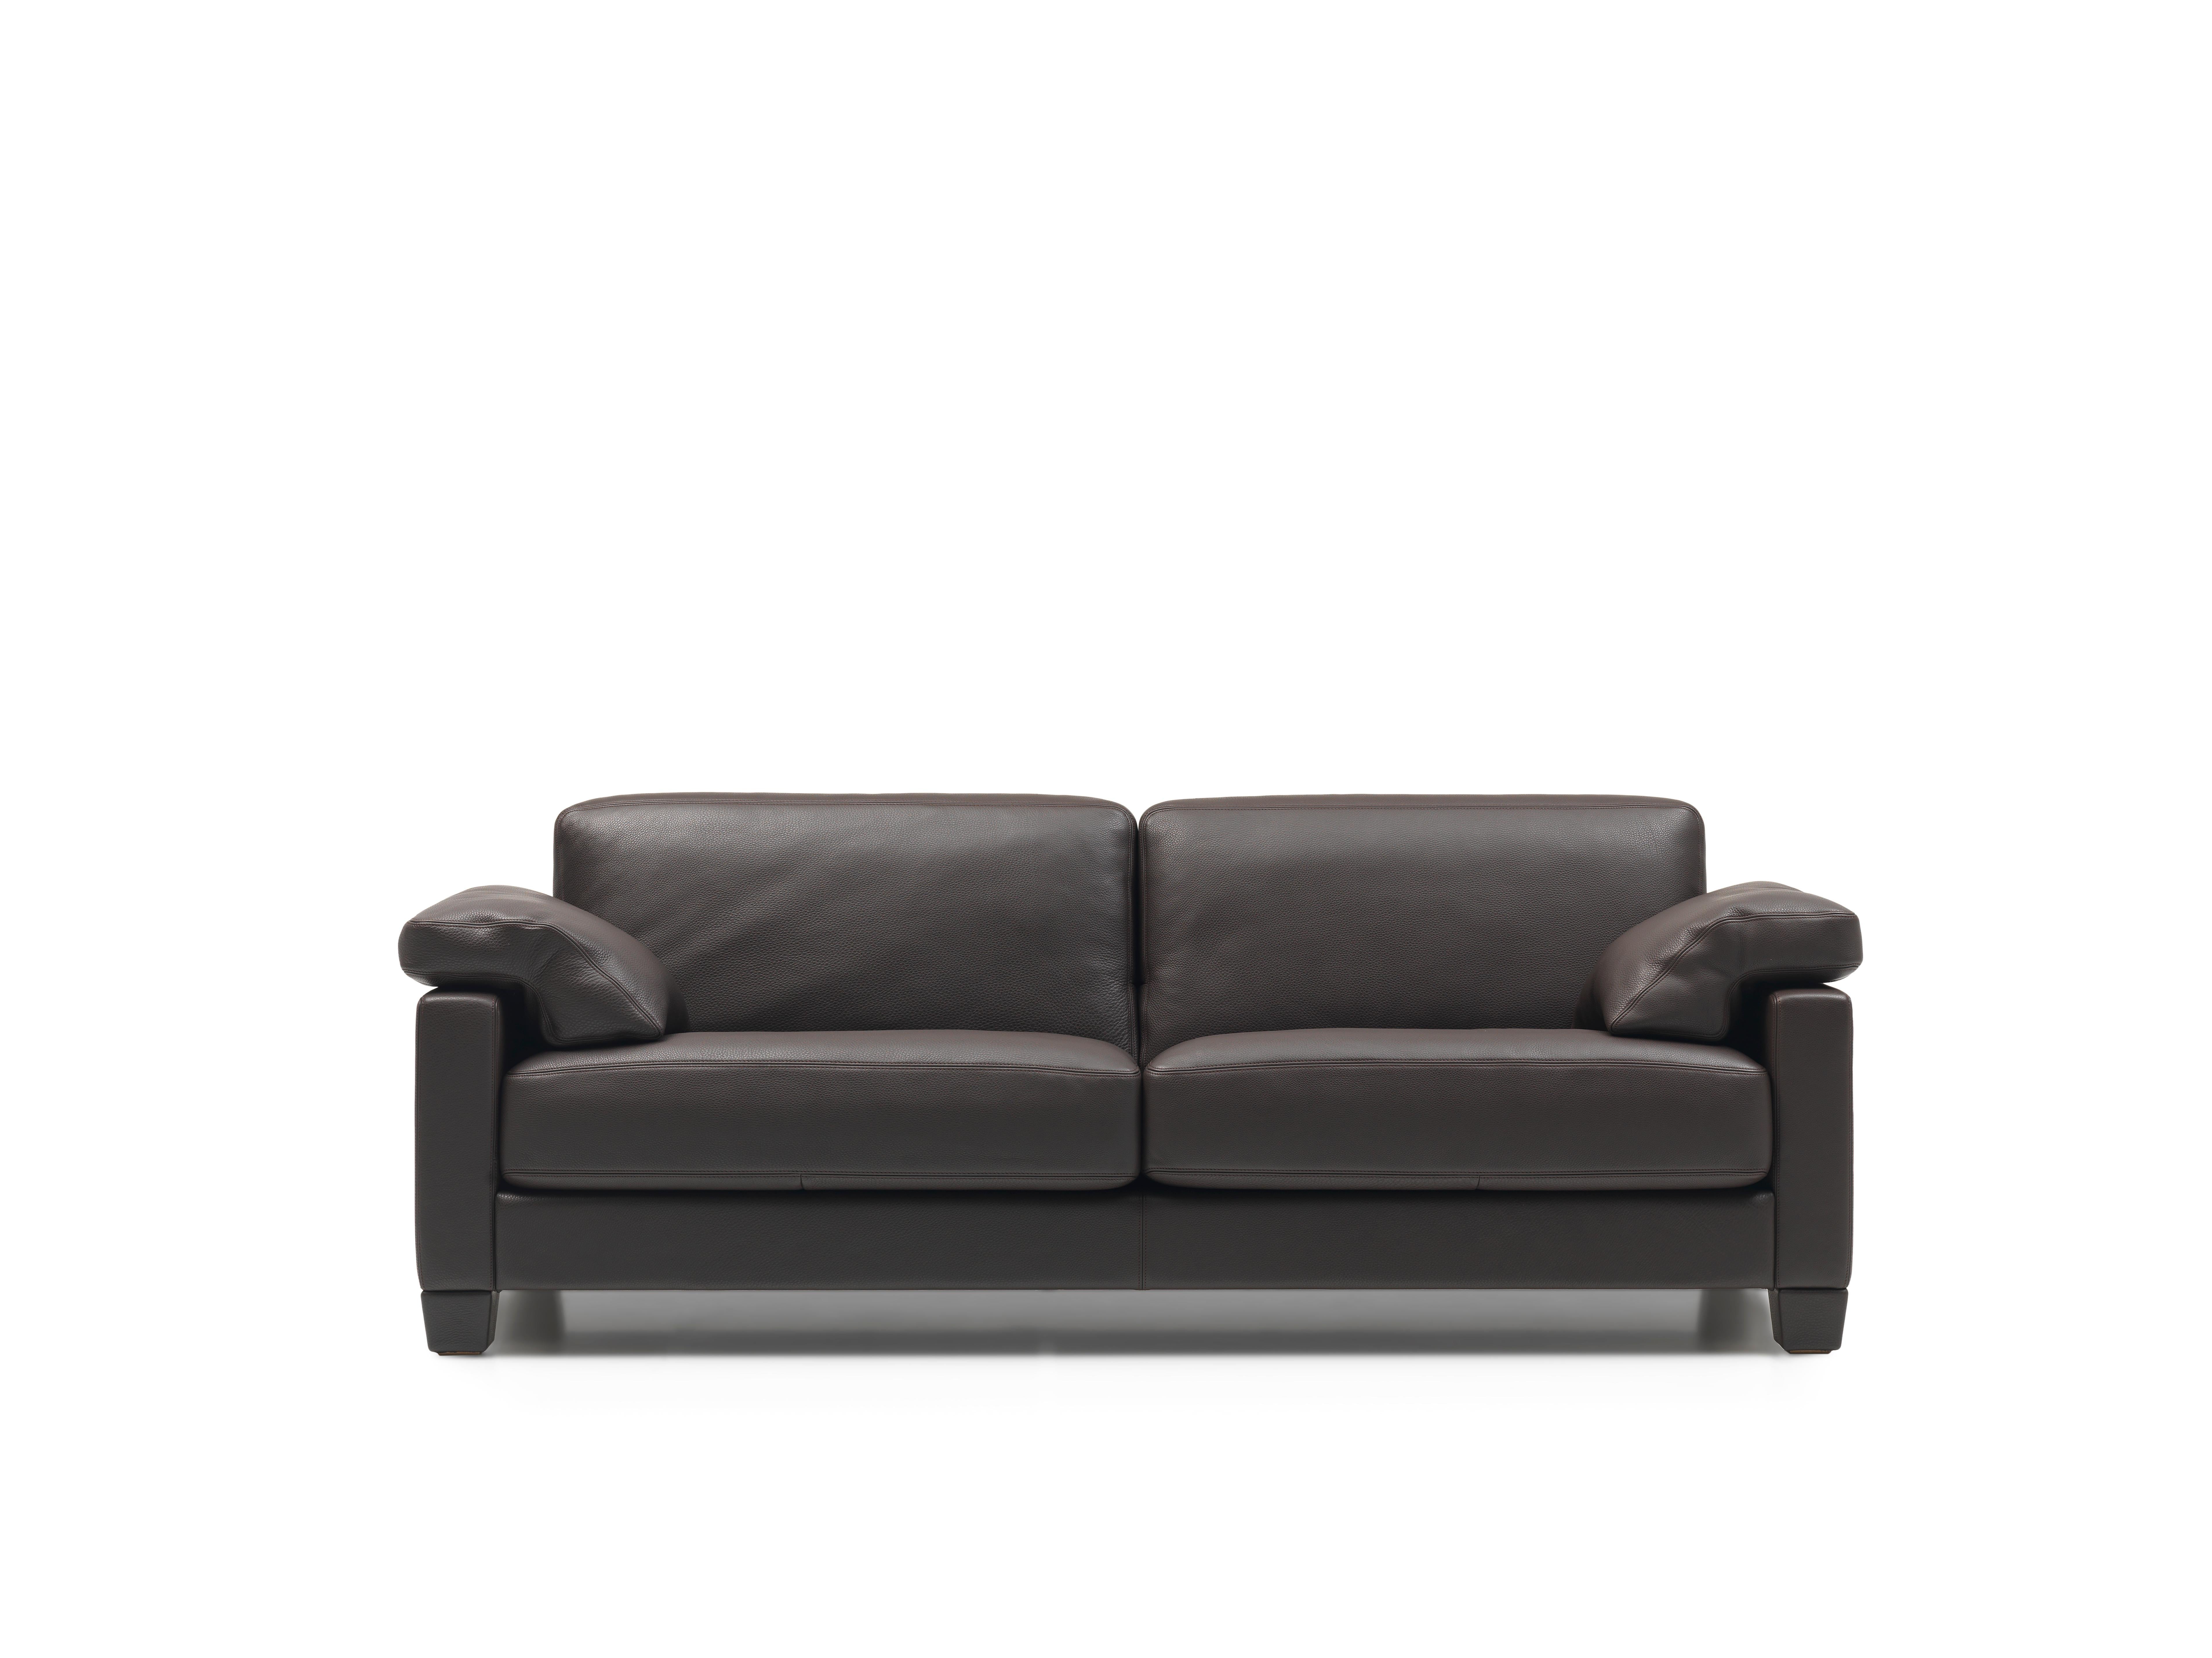 DS-17 sofa by De Sede
The cushions are optional, please contact us
Dimensions: D 87 x W 174 x H 78 cm
Materials: frame of solid beech, belted suspension; 
seat and back cushions: SEDEX upholstery, with SEDE-Fa covering